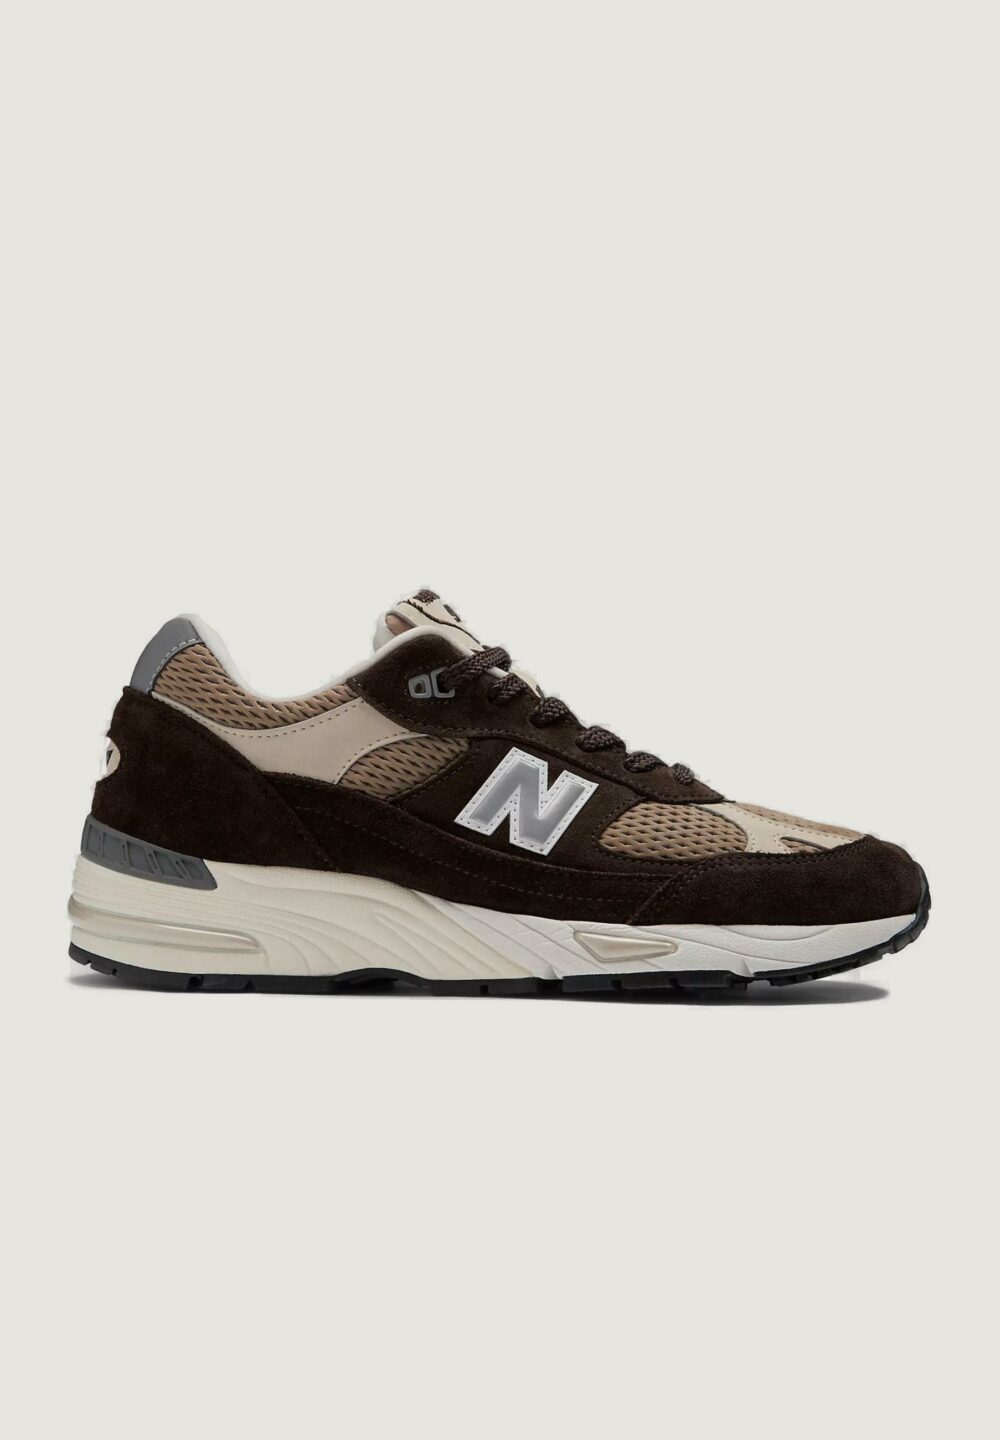 Sneakers New Balance MADE IN UK 991 Marrone - Foto 1